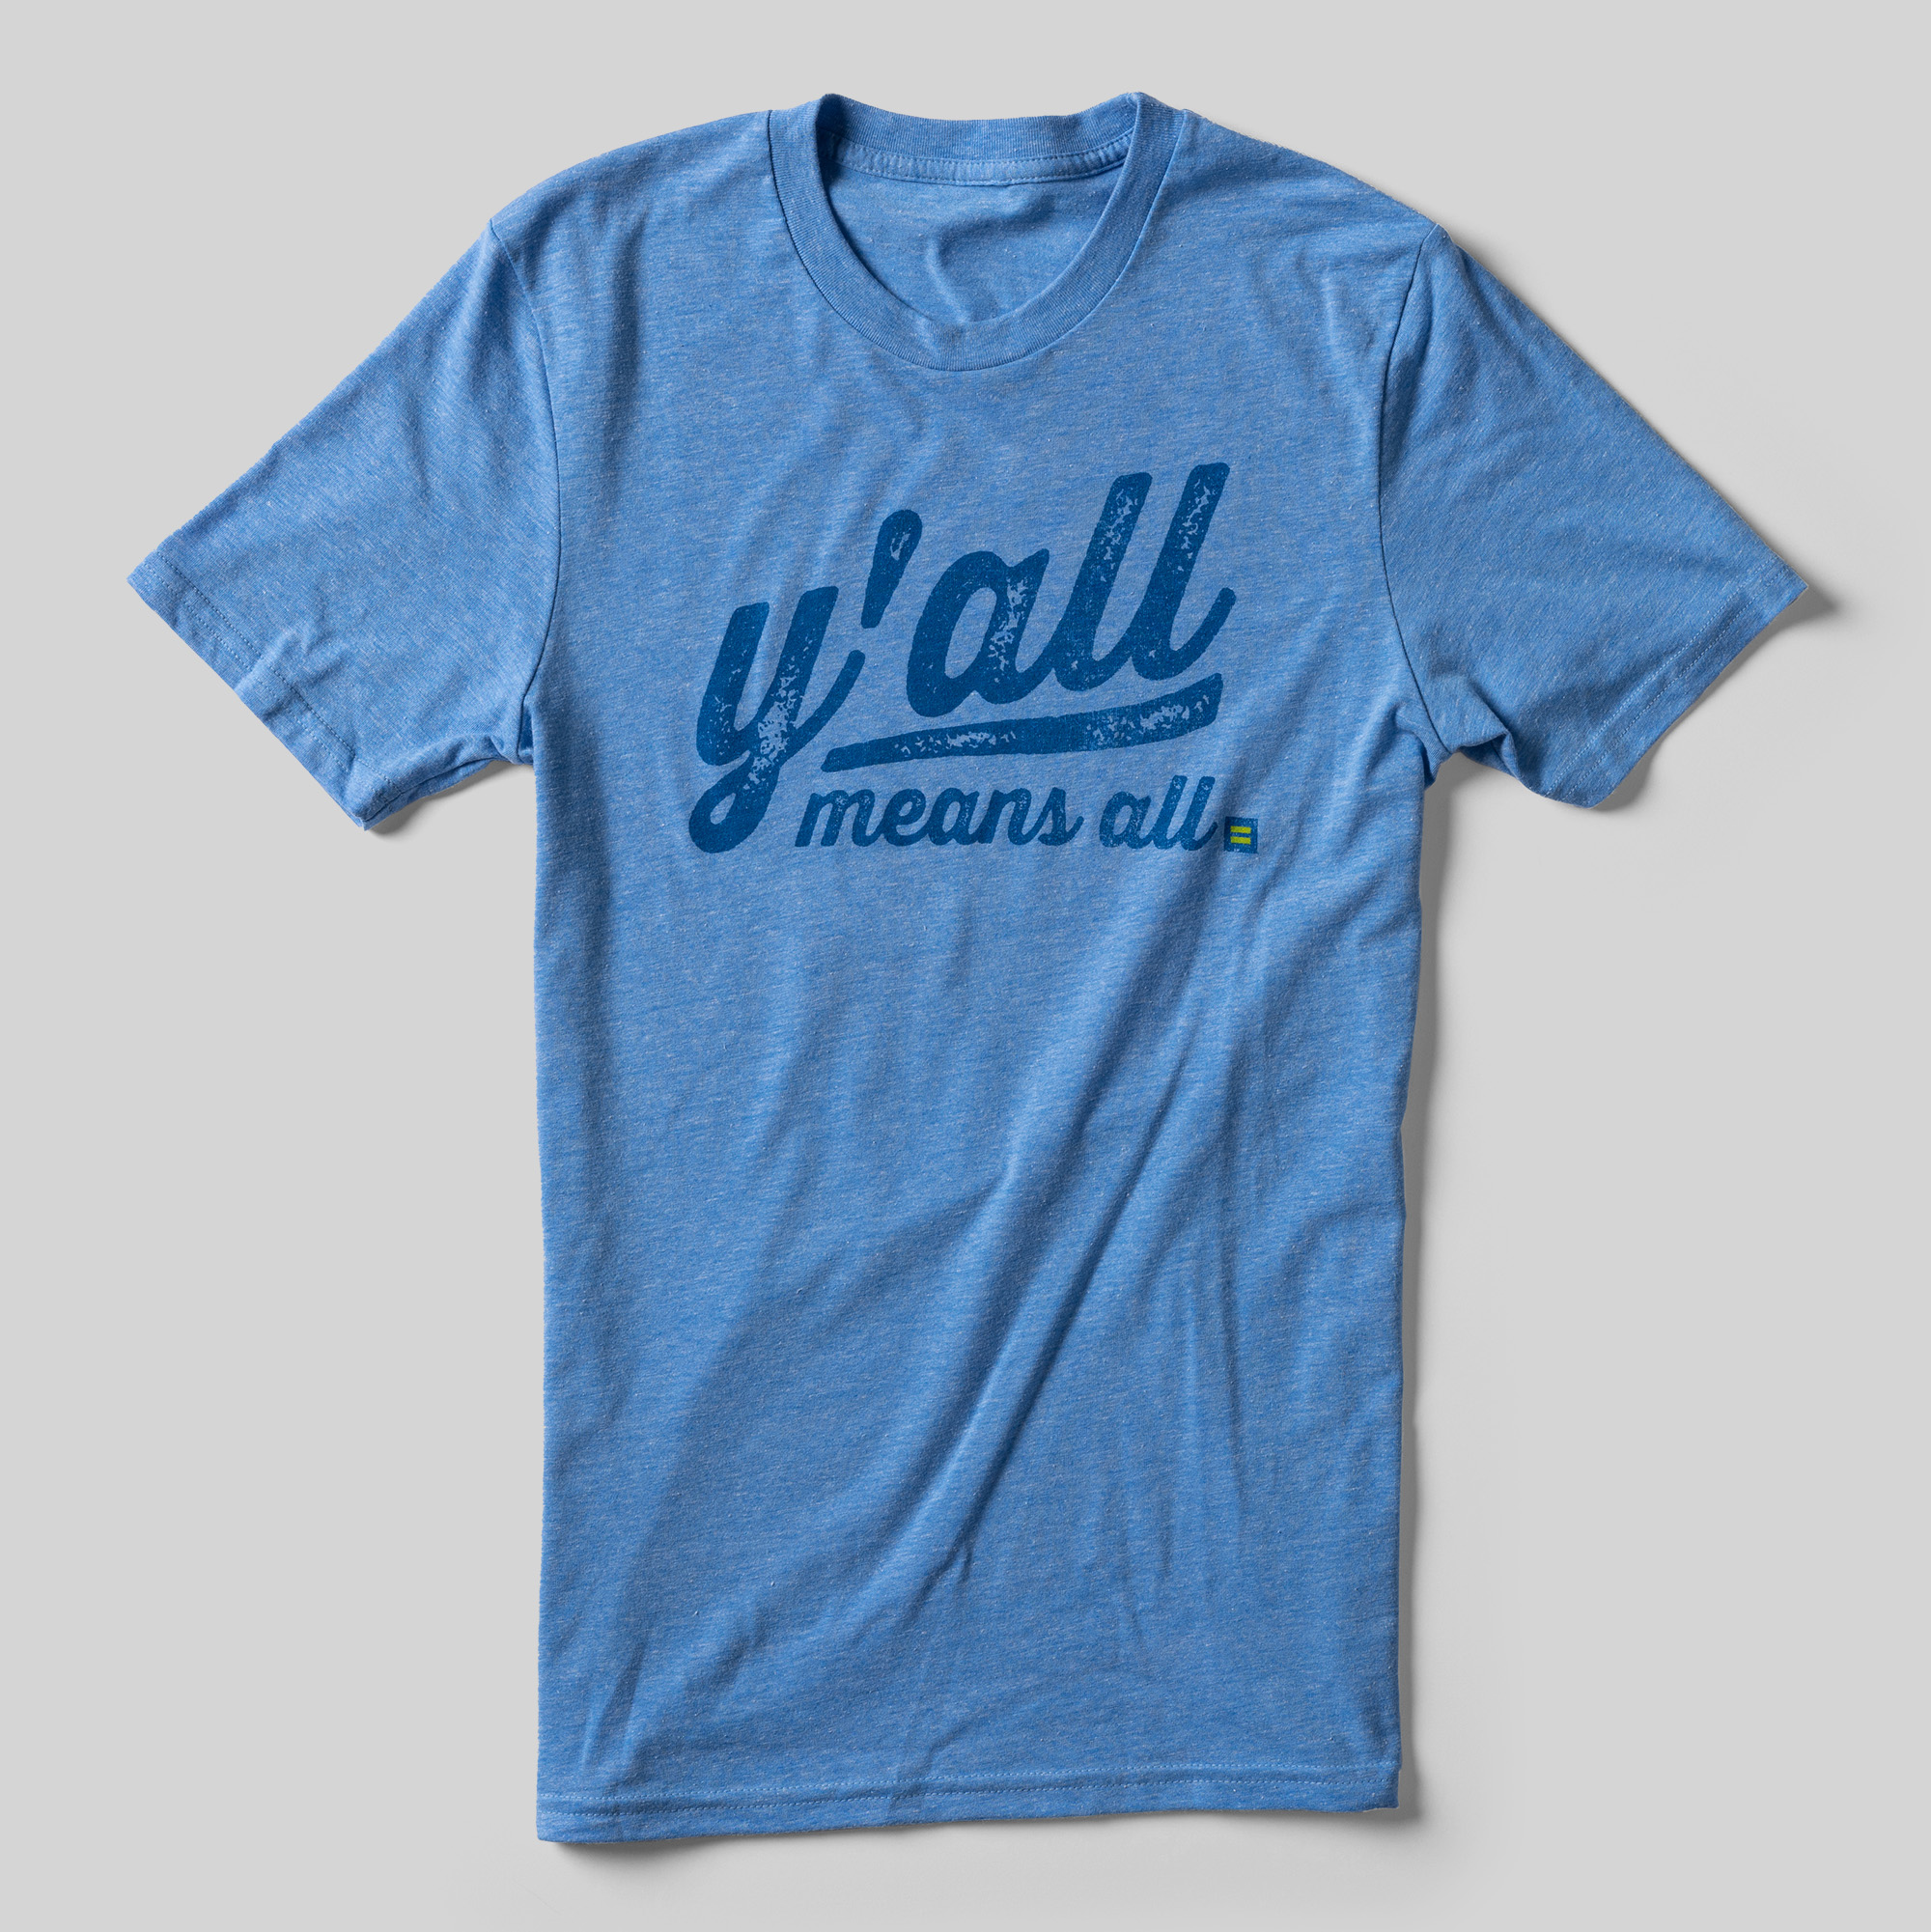 A heather blue t-shirt that reads Y'all means all in dark blue baseball-jersey style lettering.